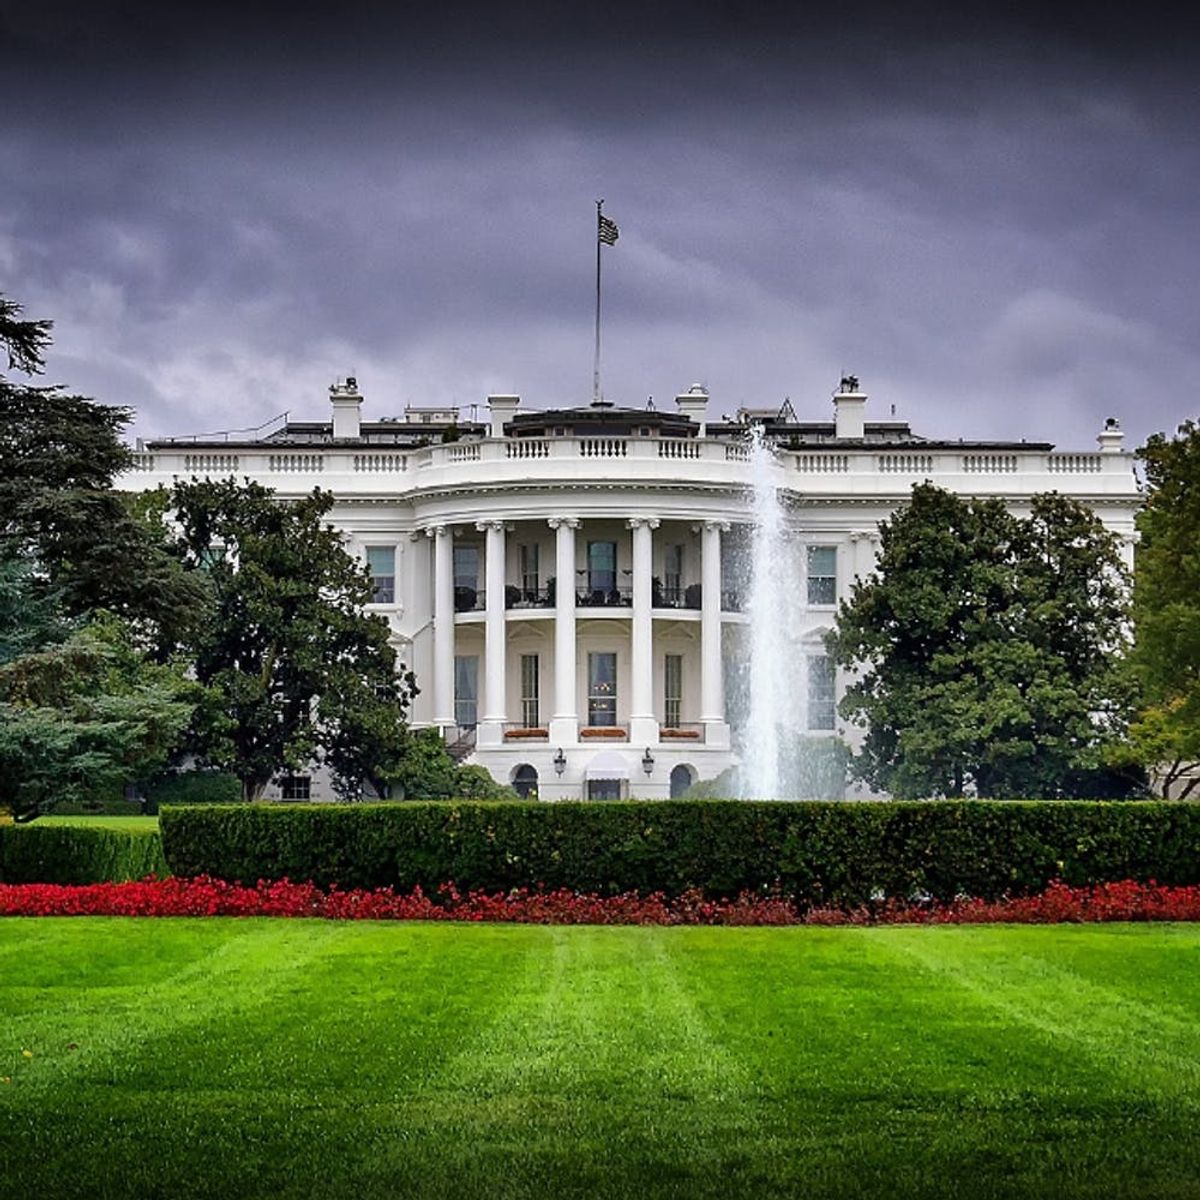 You Won’t Believe How Much It Would Cost to Buy the White House